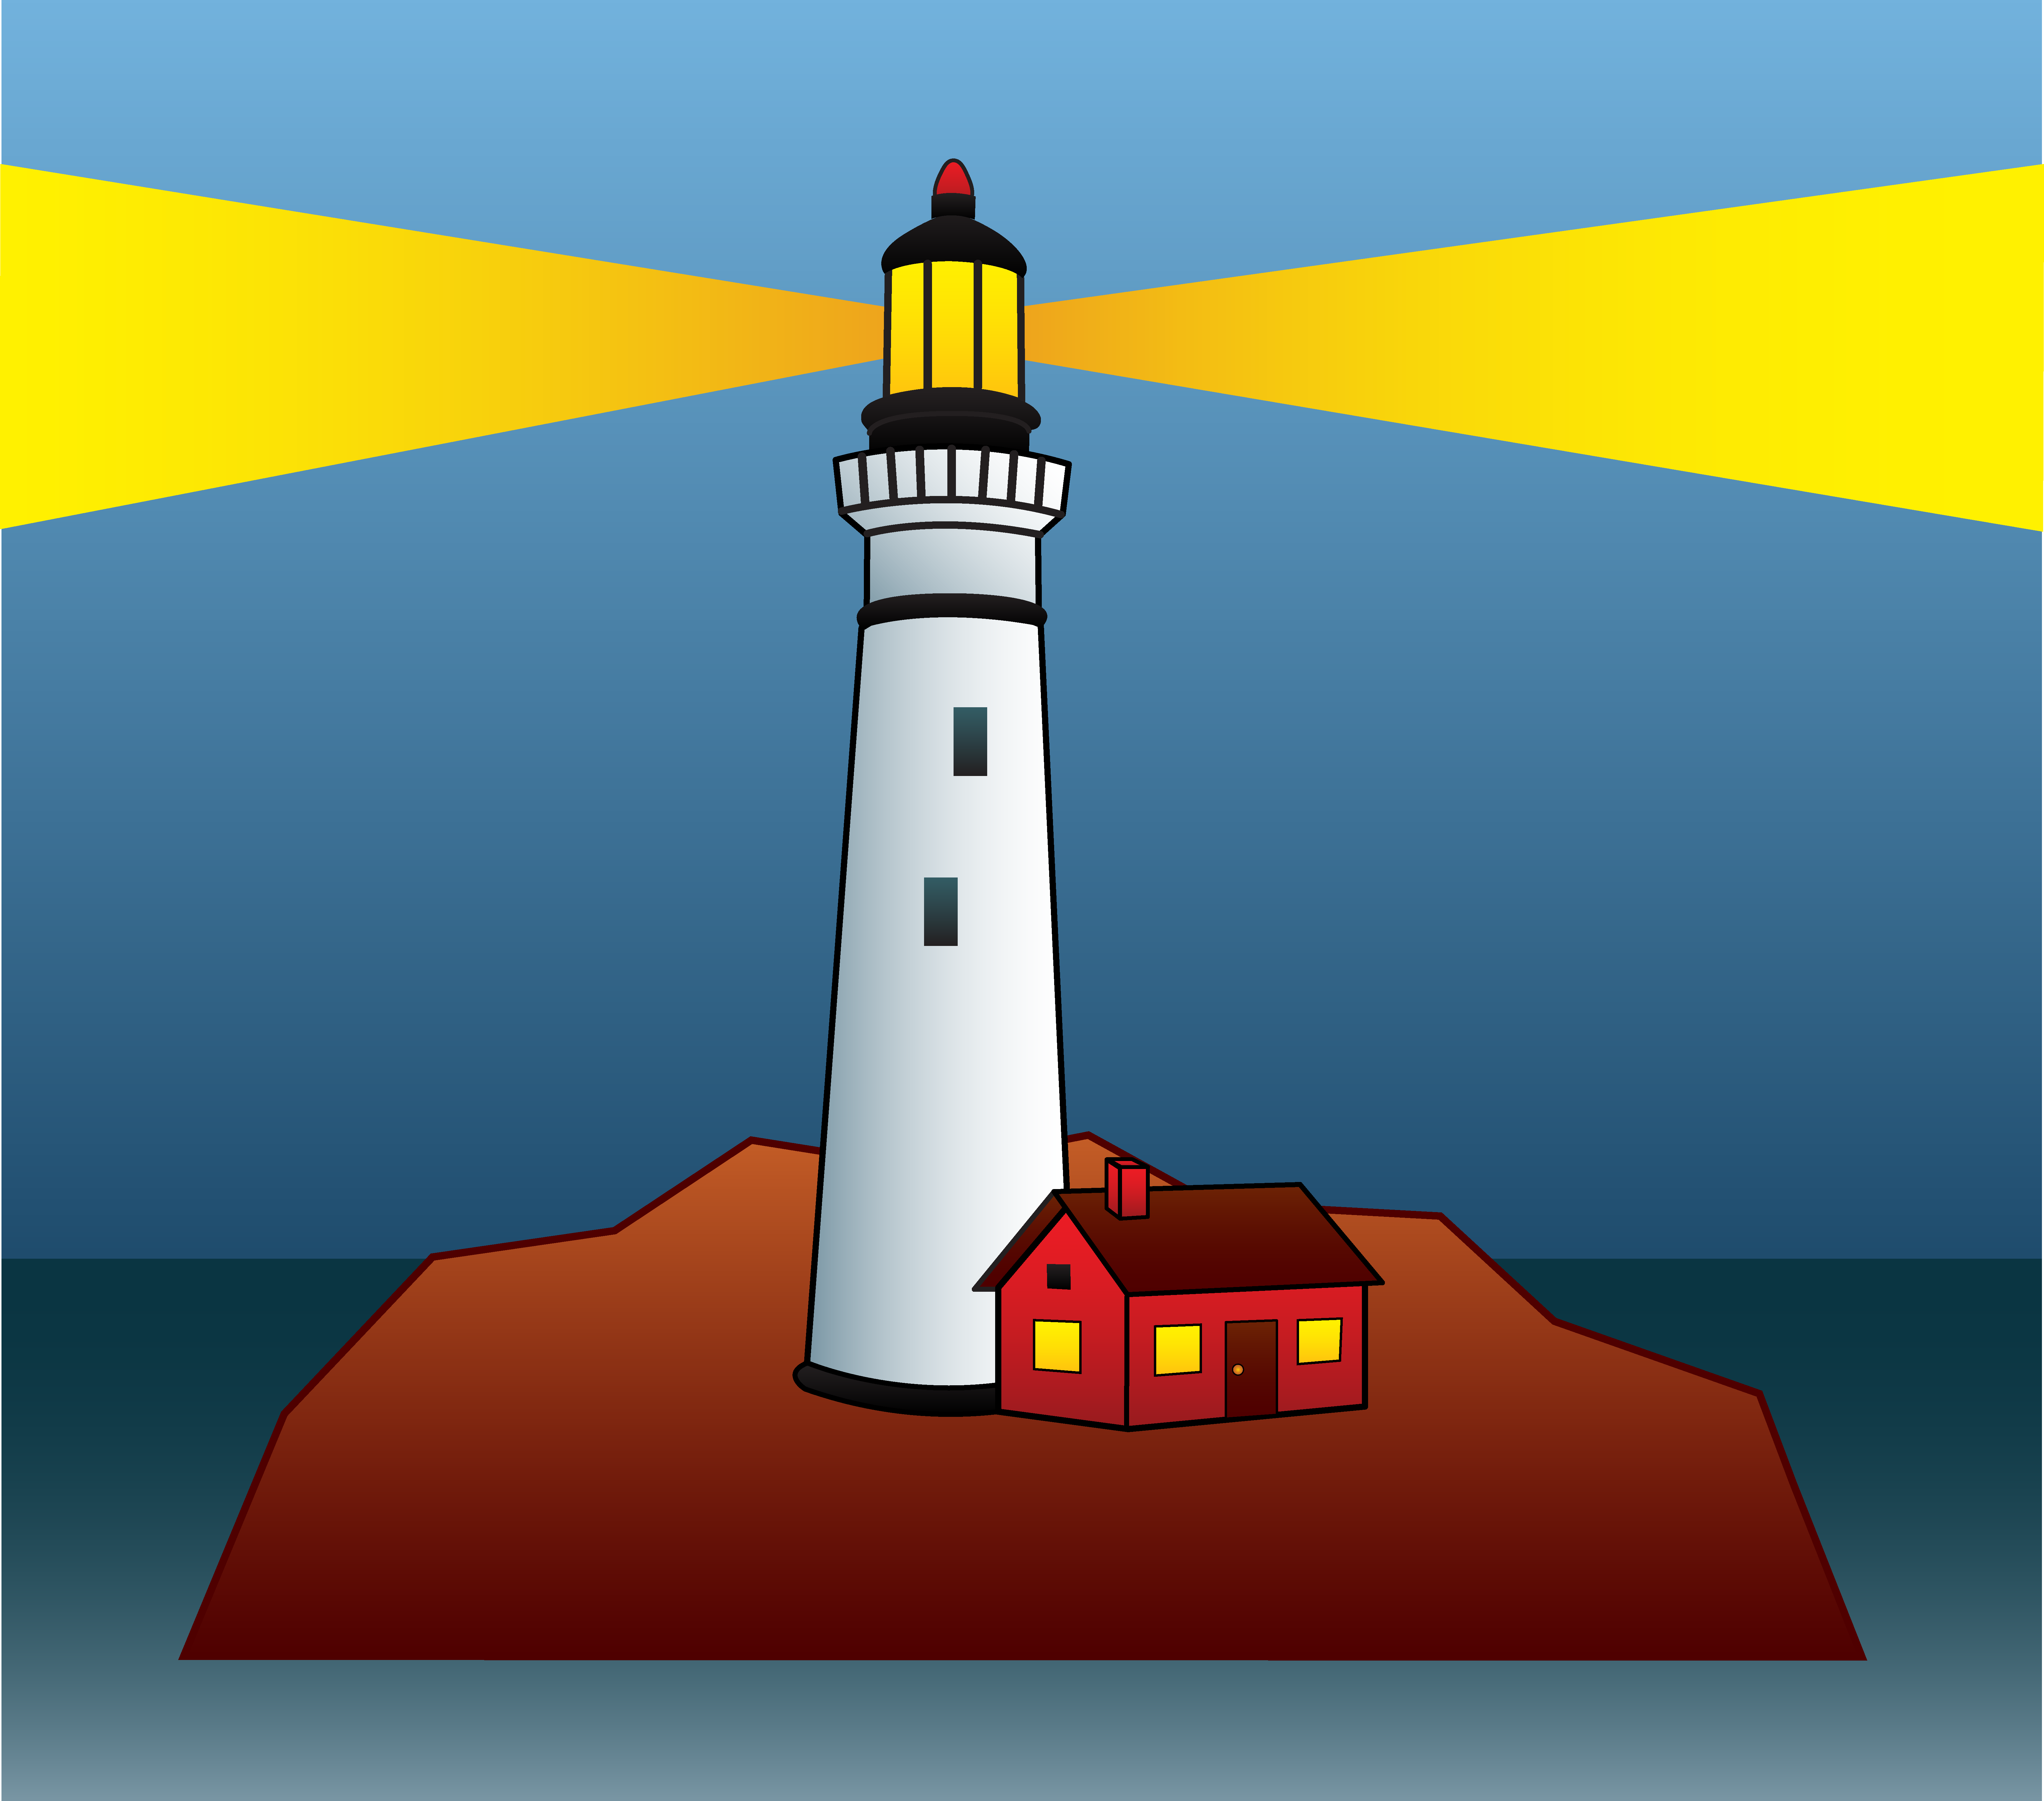 Free cliparts download clip. Lighthouse clipart uses light